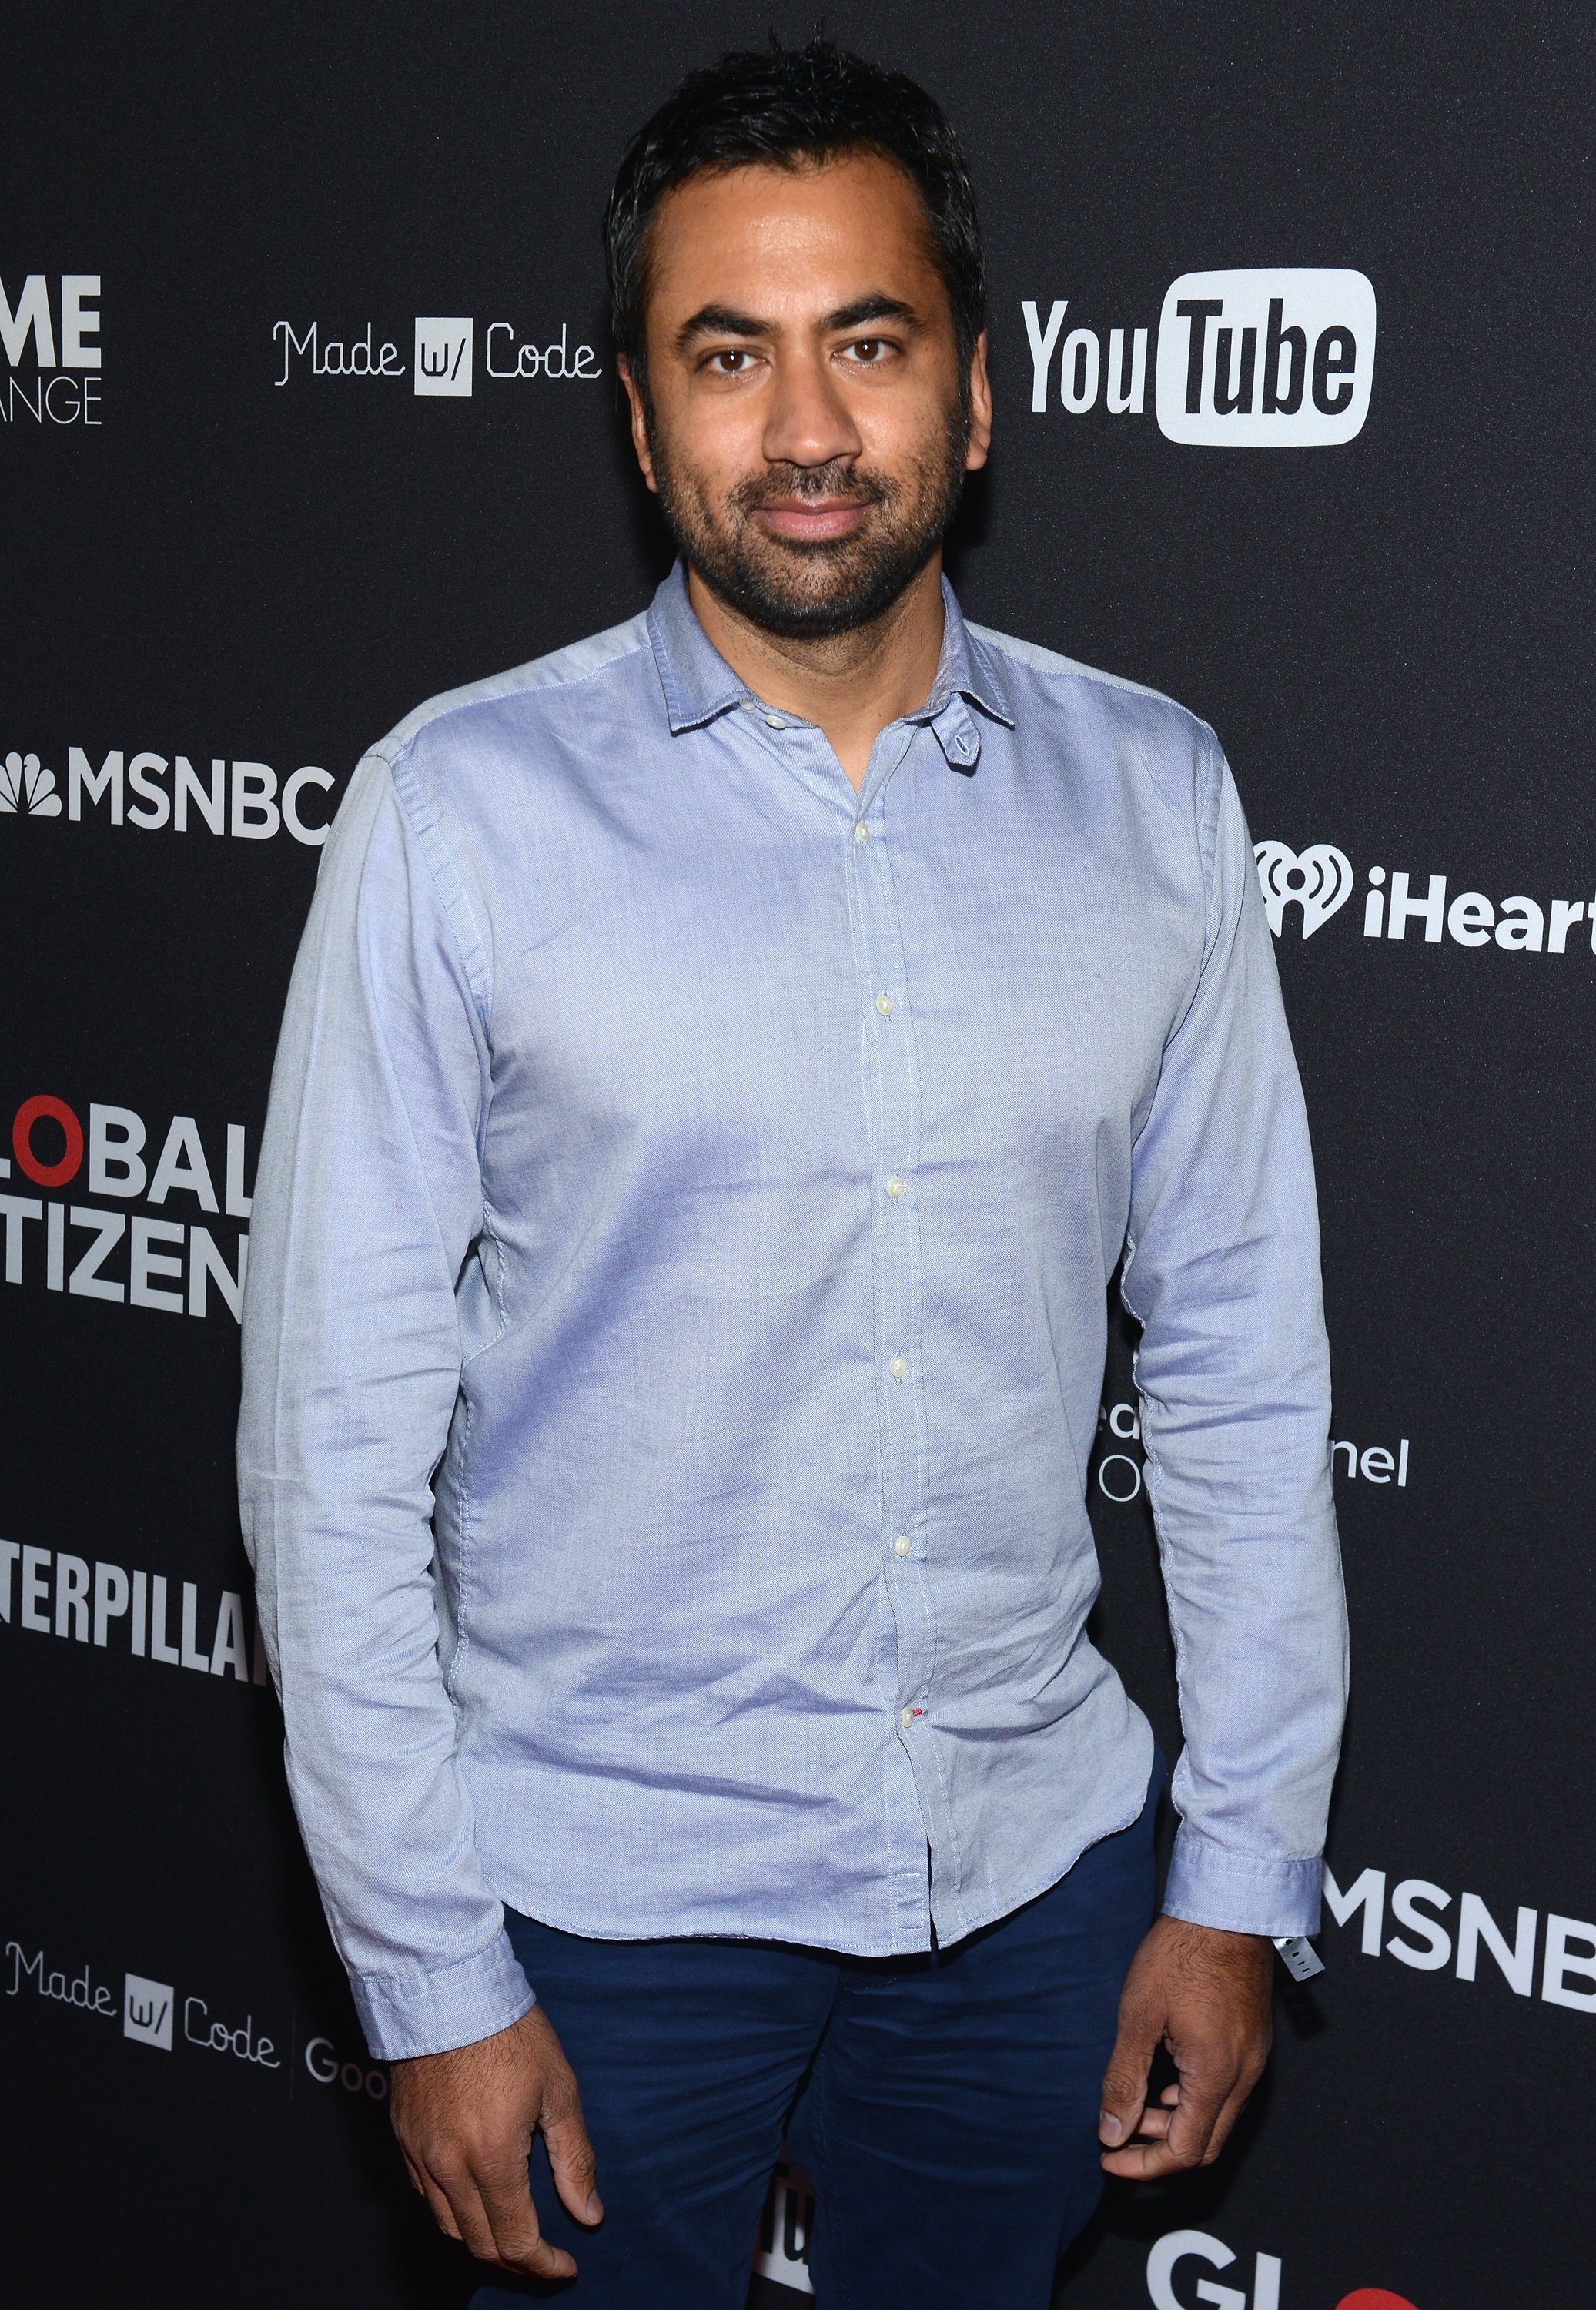  Kal Penn attends the 2016 Global Citizen Festival In Central Park To End Extreme Poverty By 2030 at Central Park on September 24, 2016 in New York City